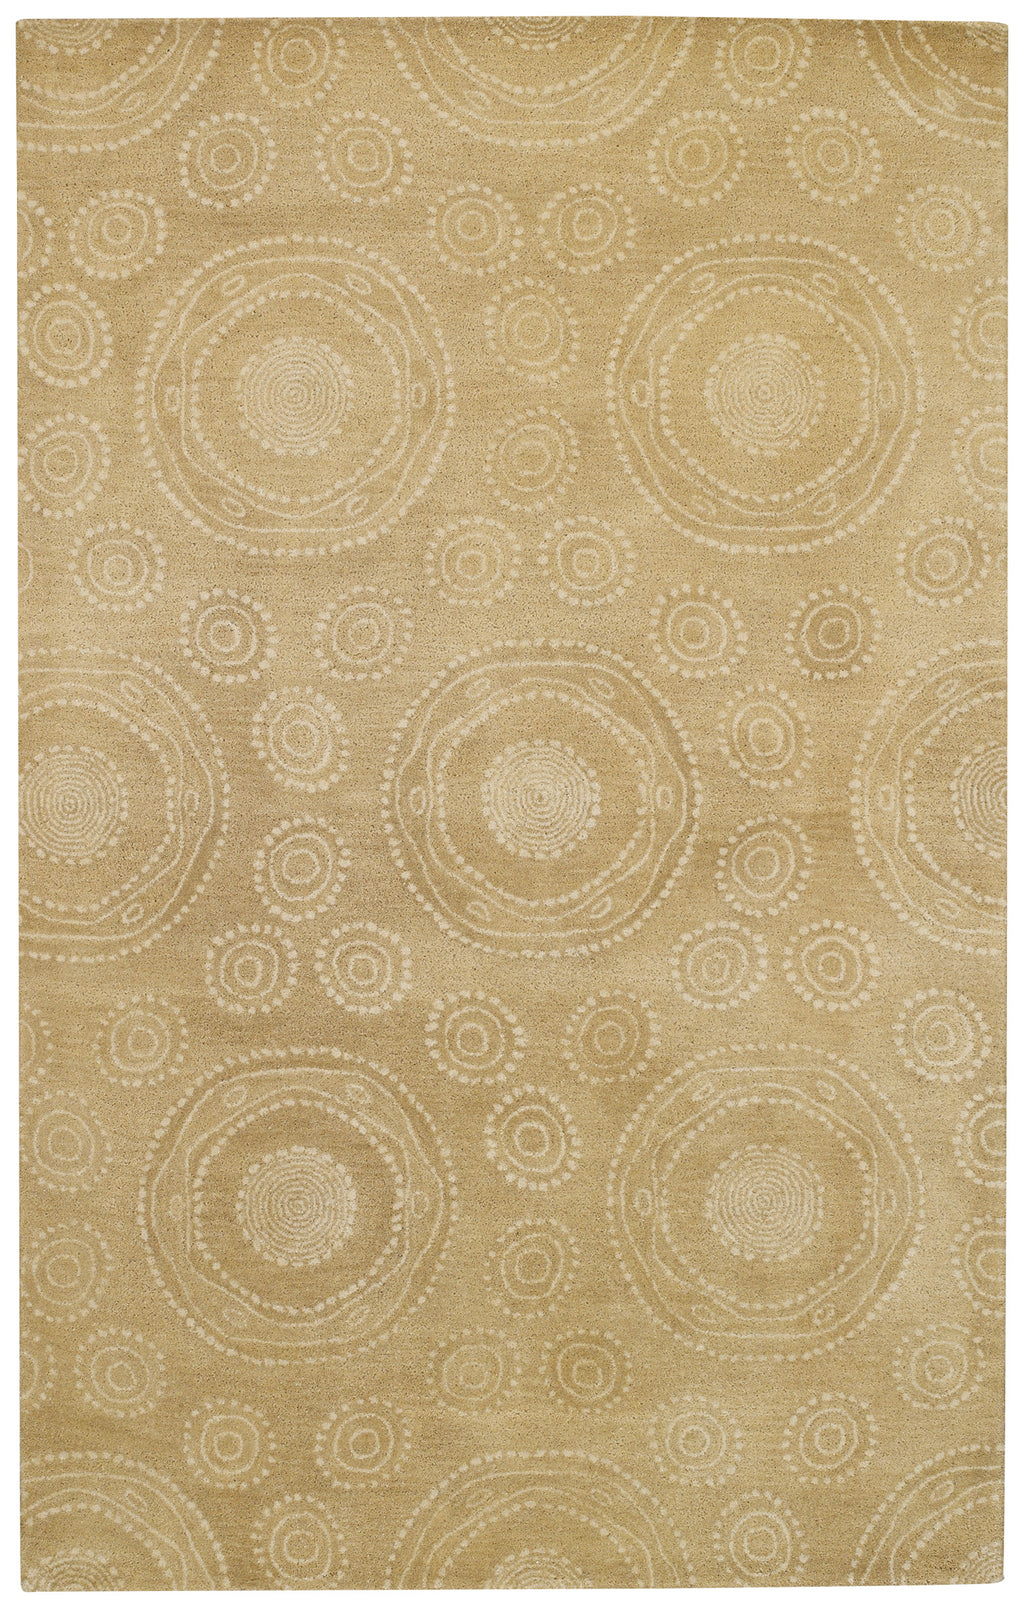 Capel Spindles 3283 Wheat 100 Area Rug main image